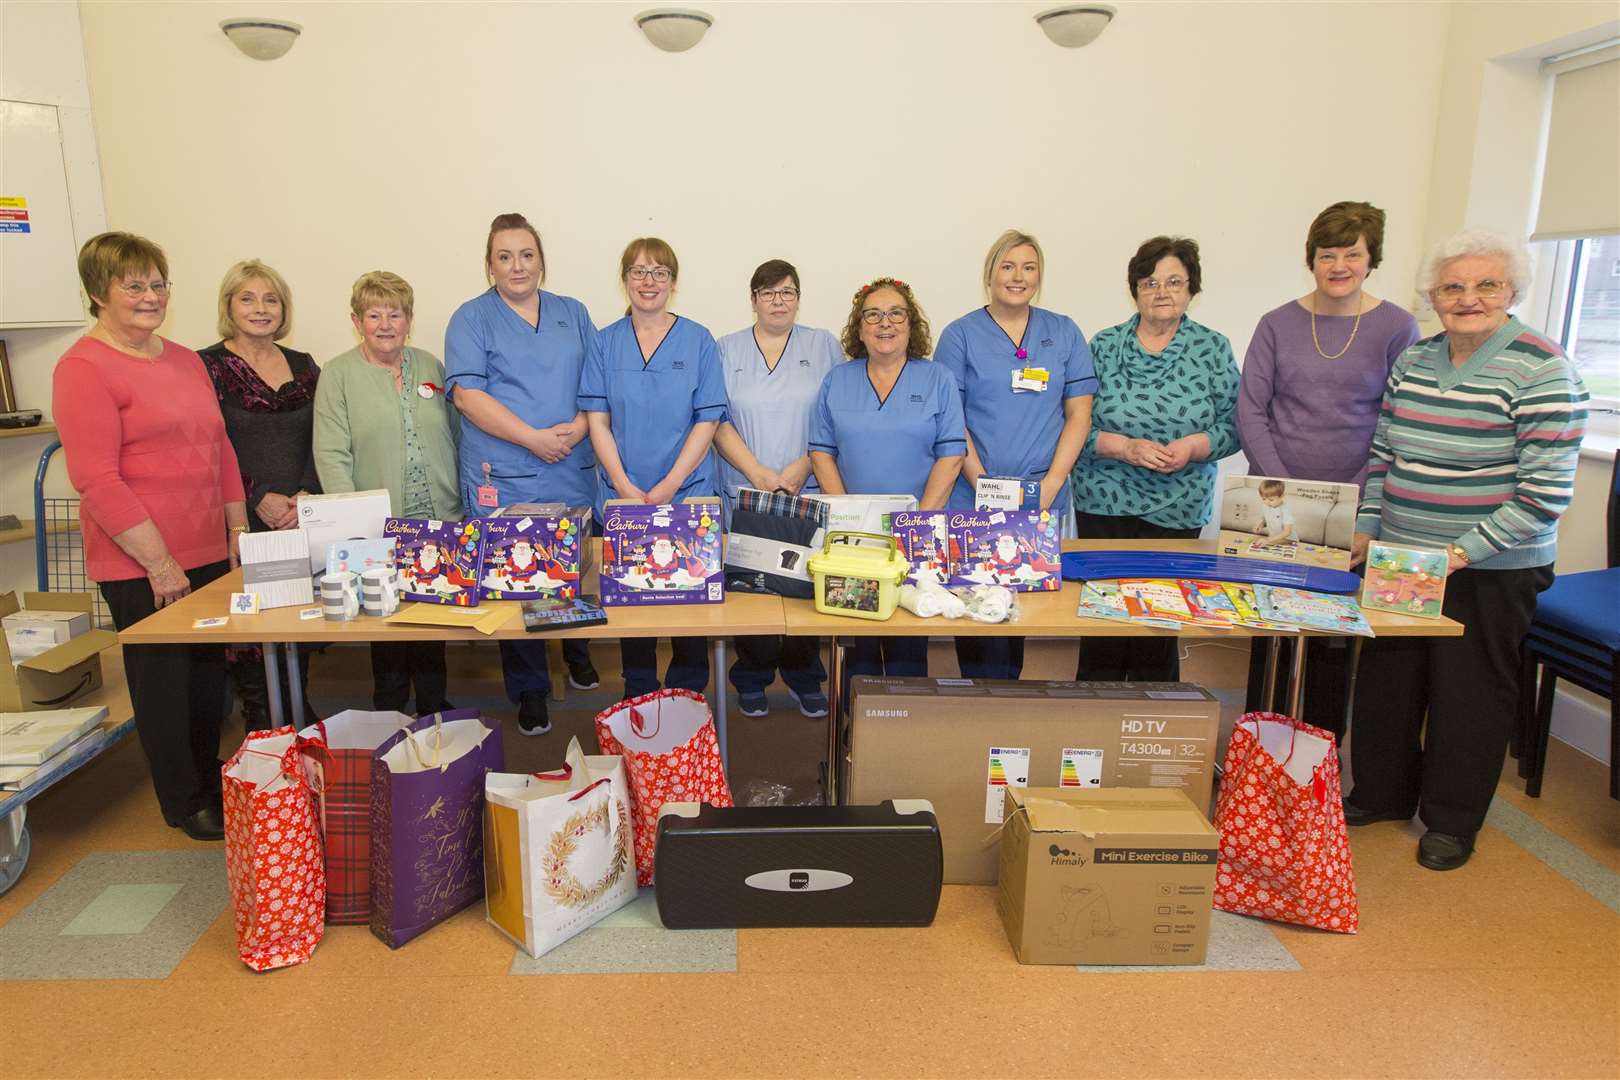 The handover of gifts to Caithness General Hospital. Picture: Robert MacDonald/Northern Studios